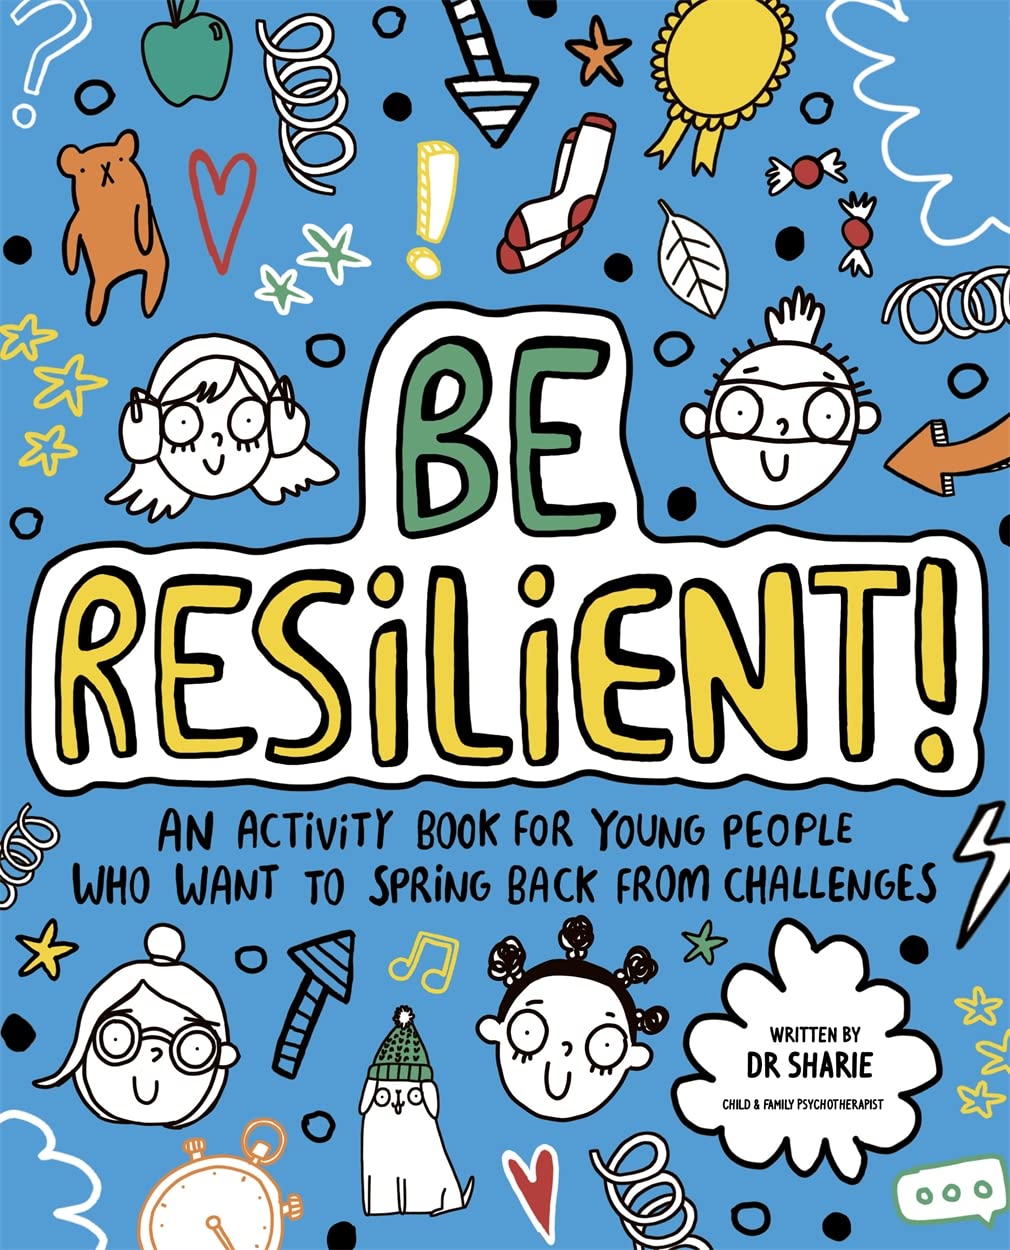 Be Resilient! Mindful Kids: An activity book for young people who want to spring back from challenges